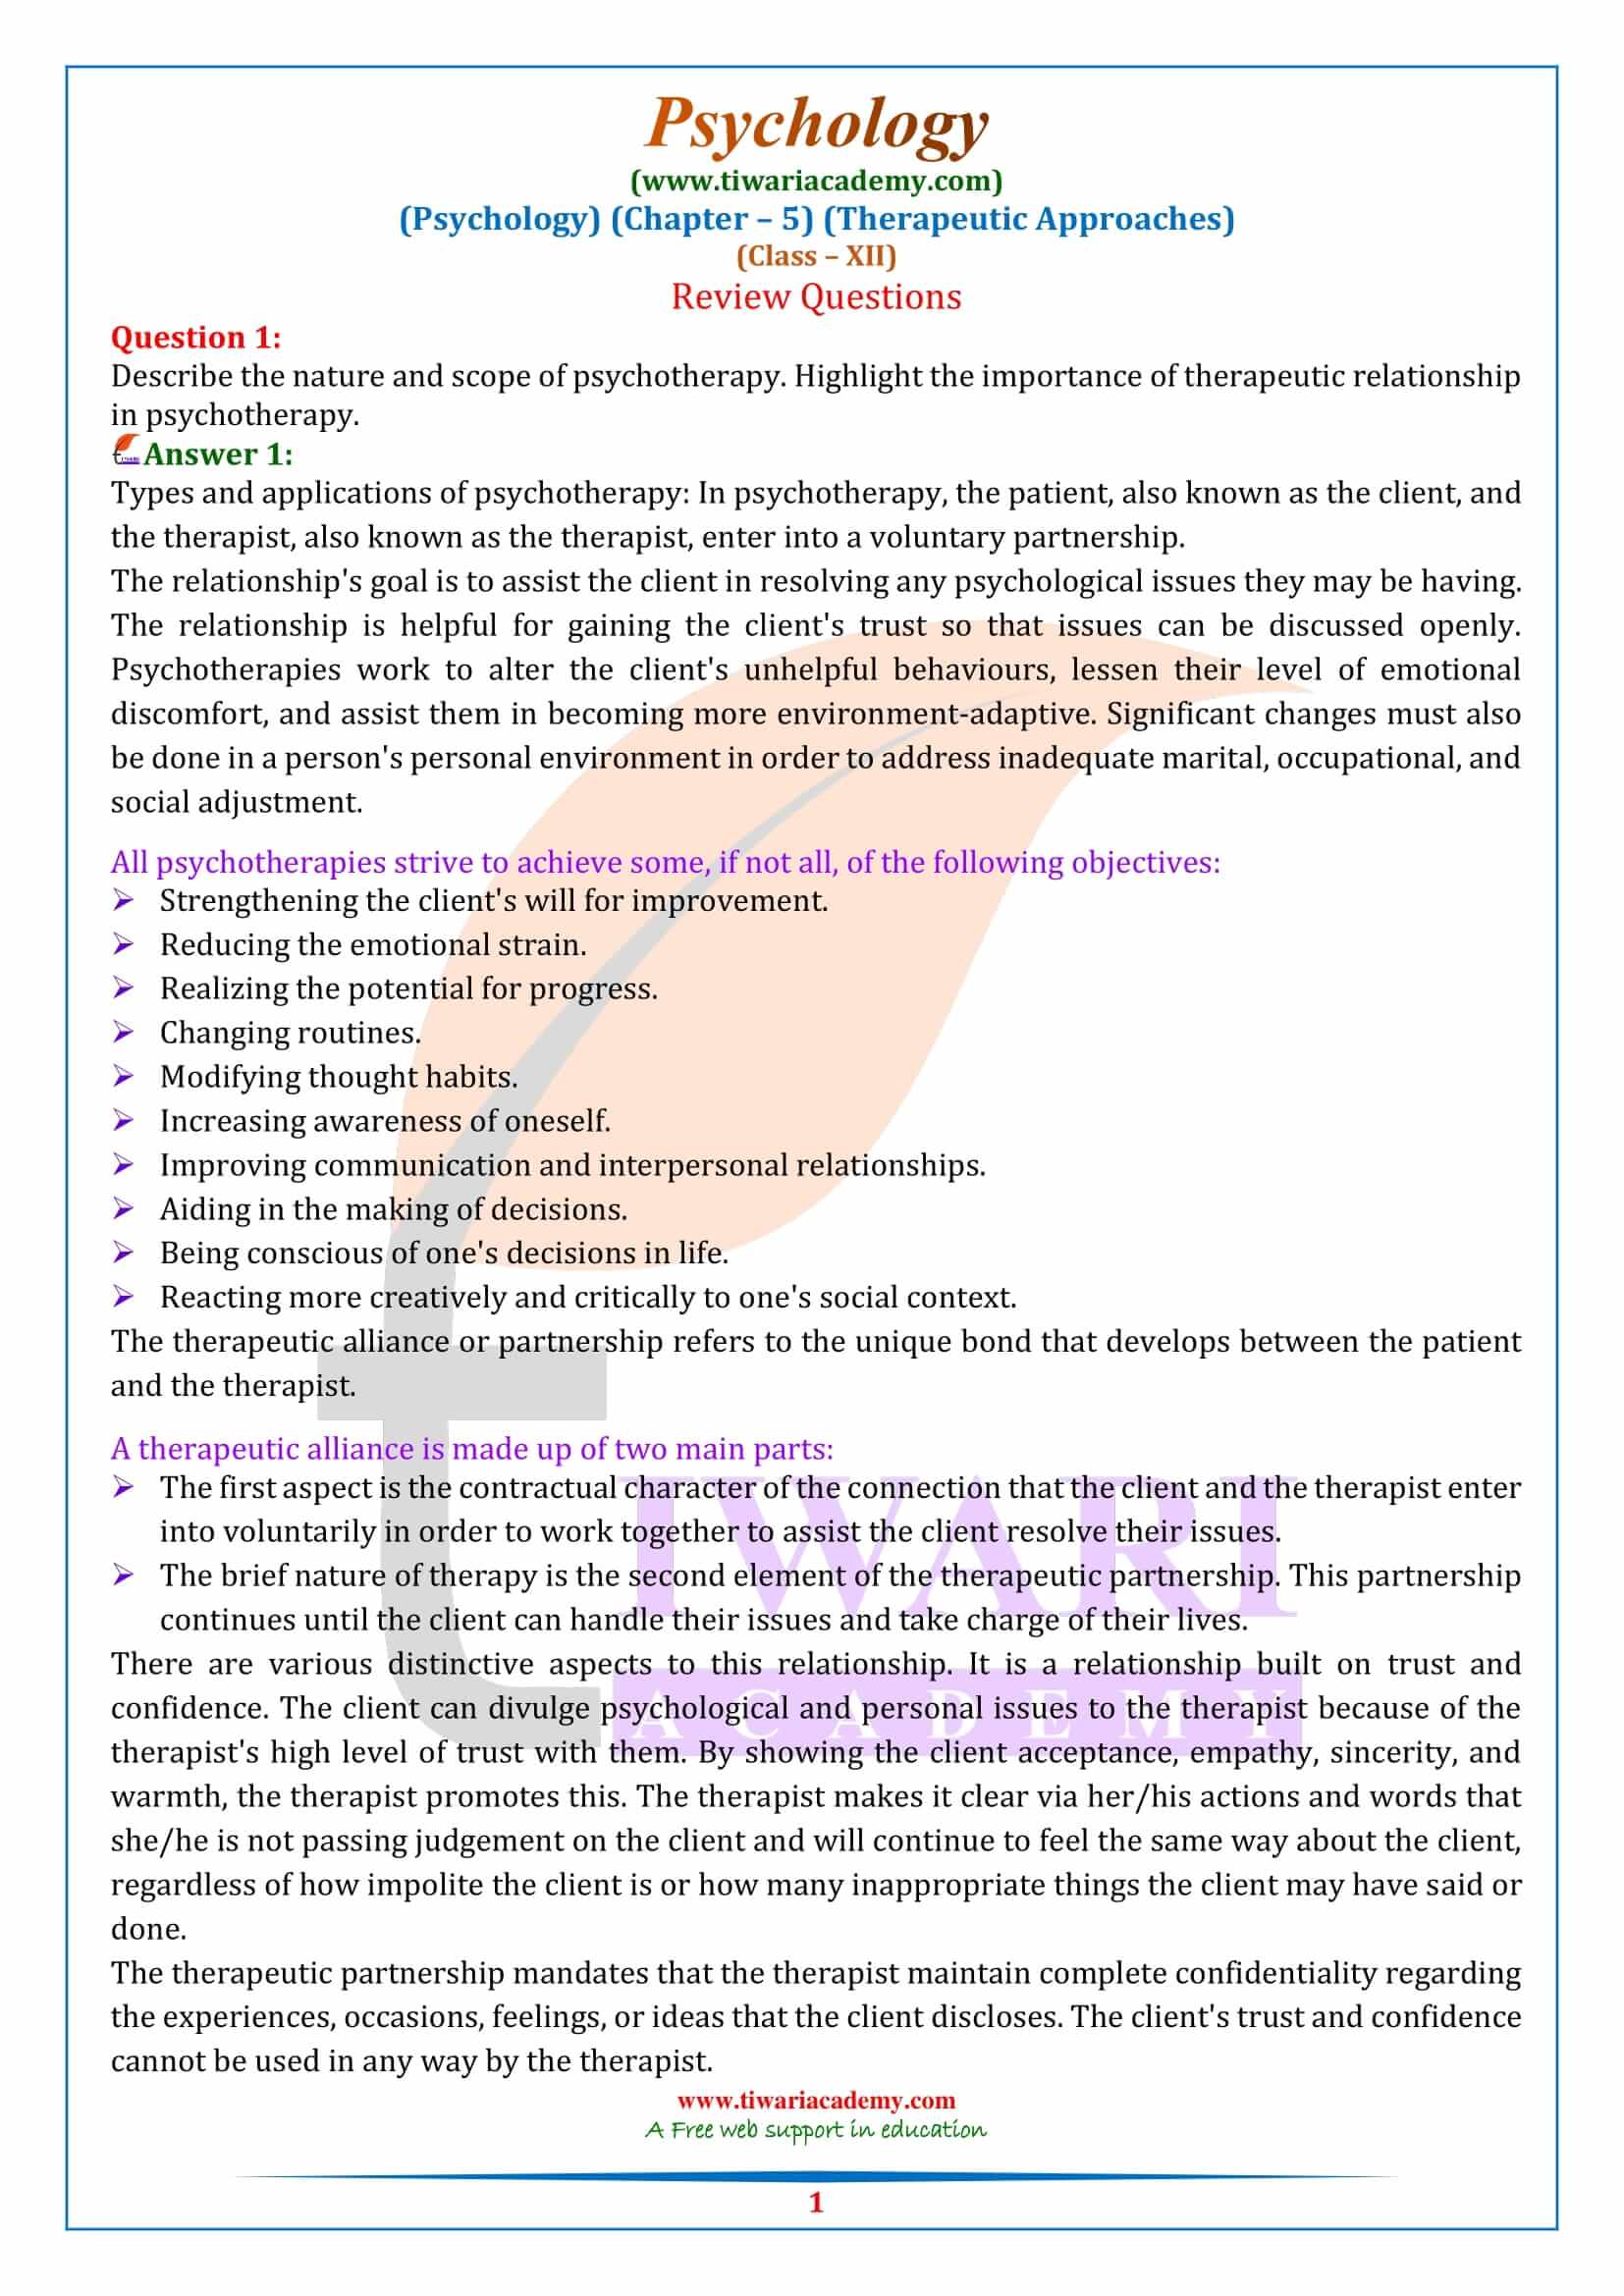 Class 12 Psychology Chapter 5 Therapeutic Approaches